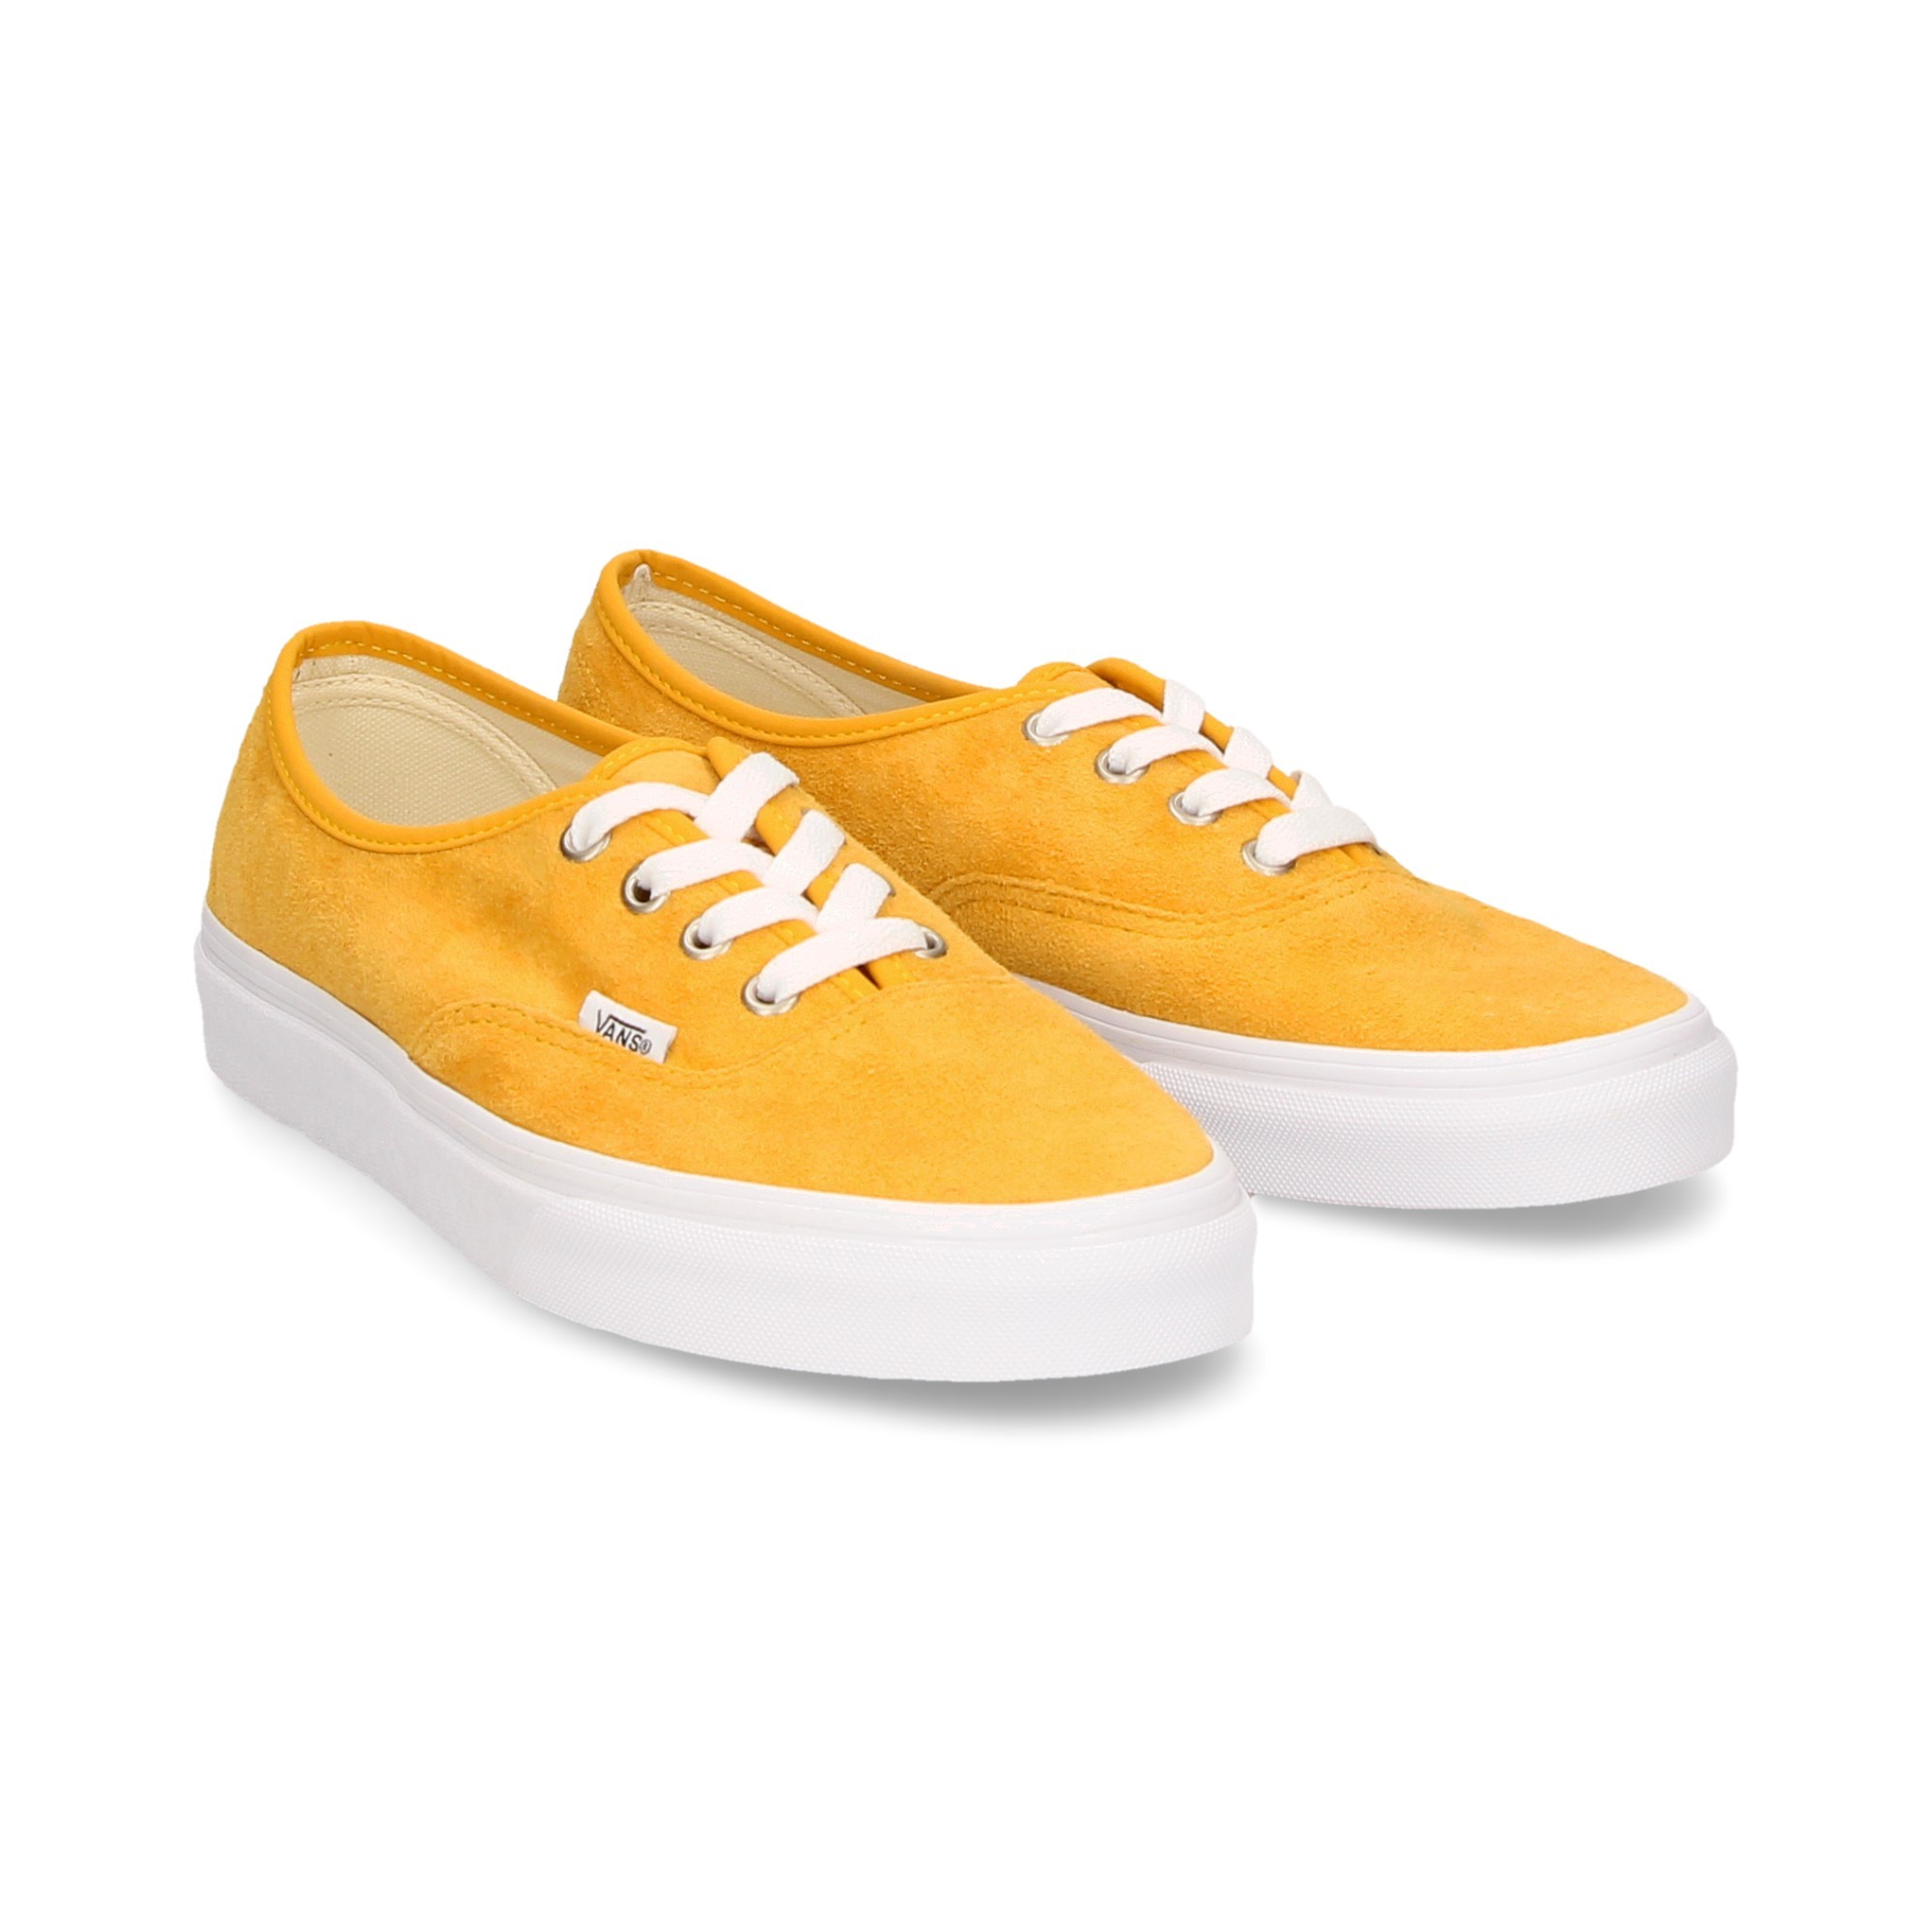 sporty-suede-yellow